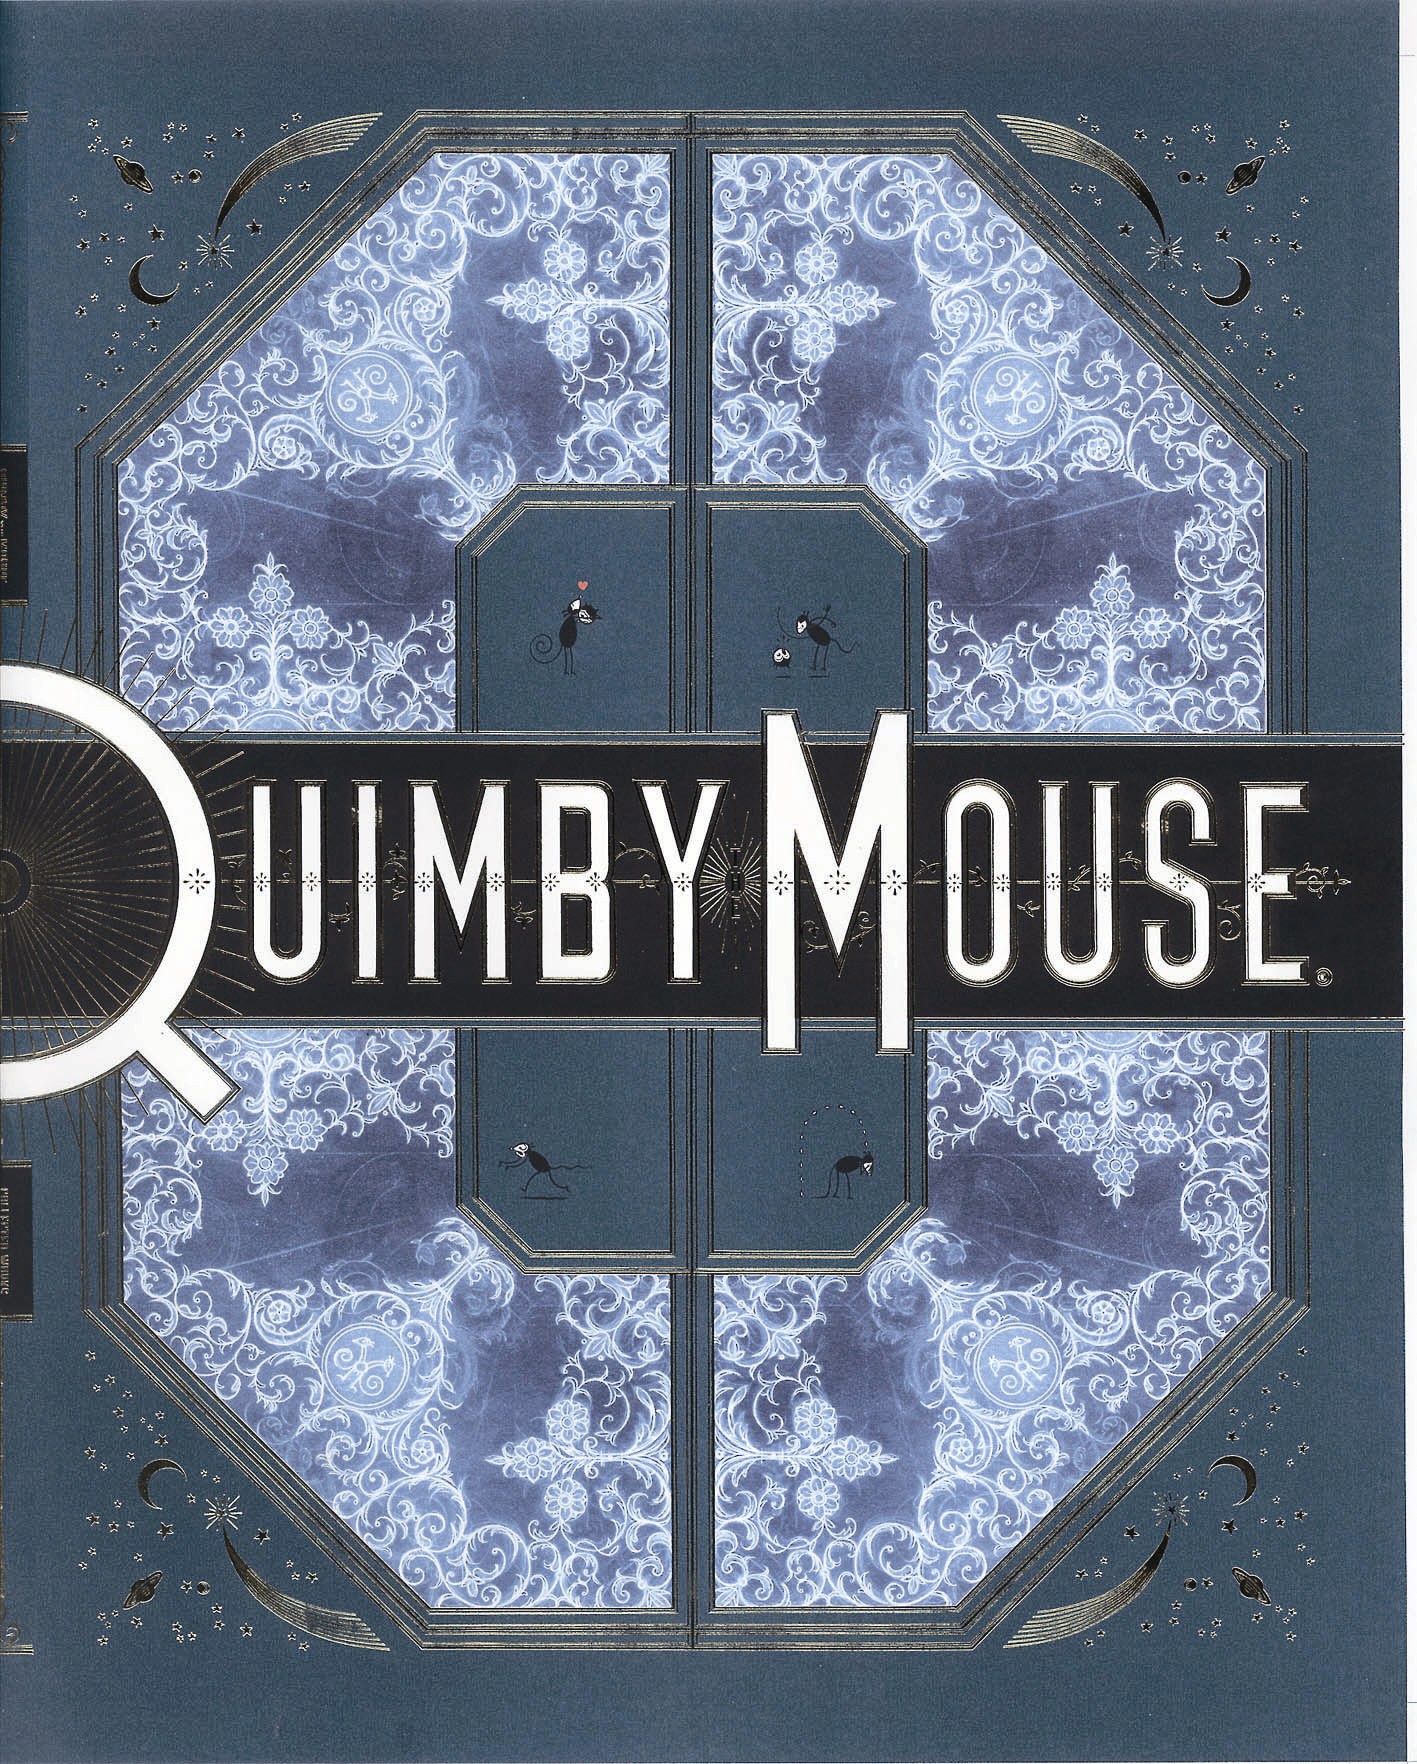 Book “Quimby The Mouse” by Chris Ware — November 20, 2003